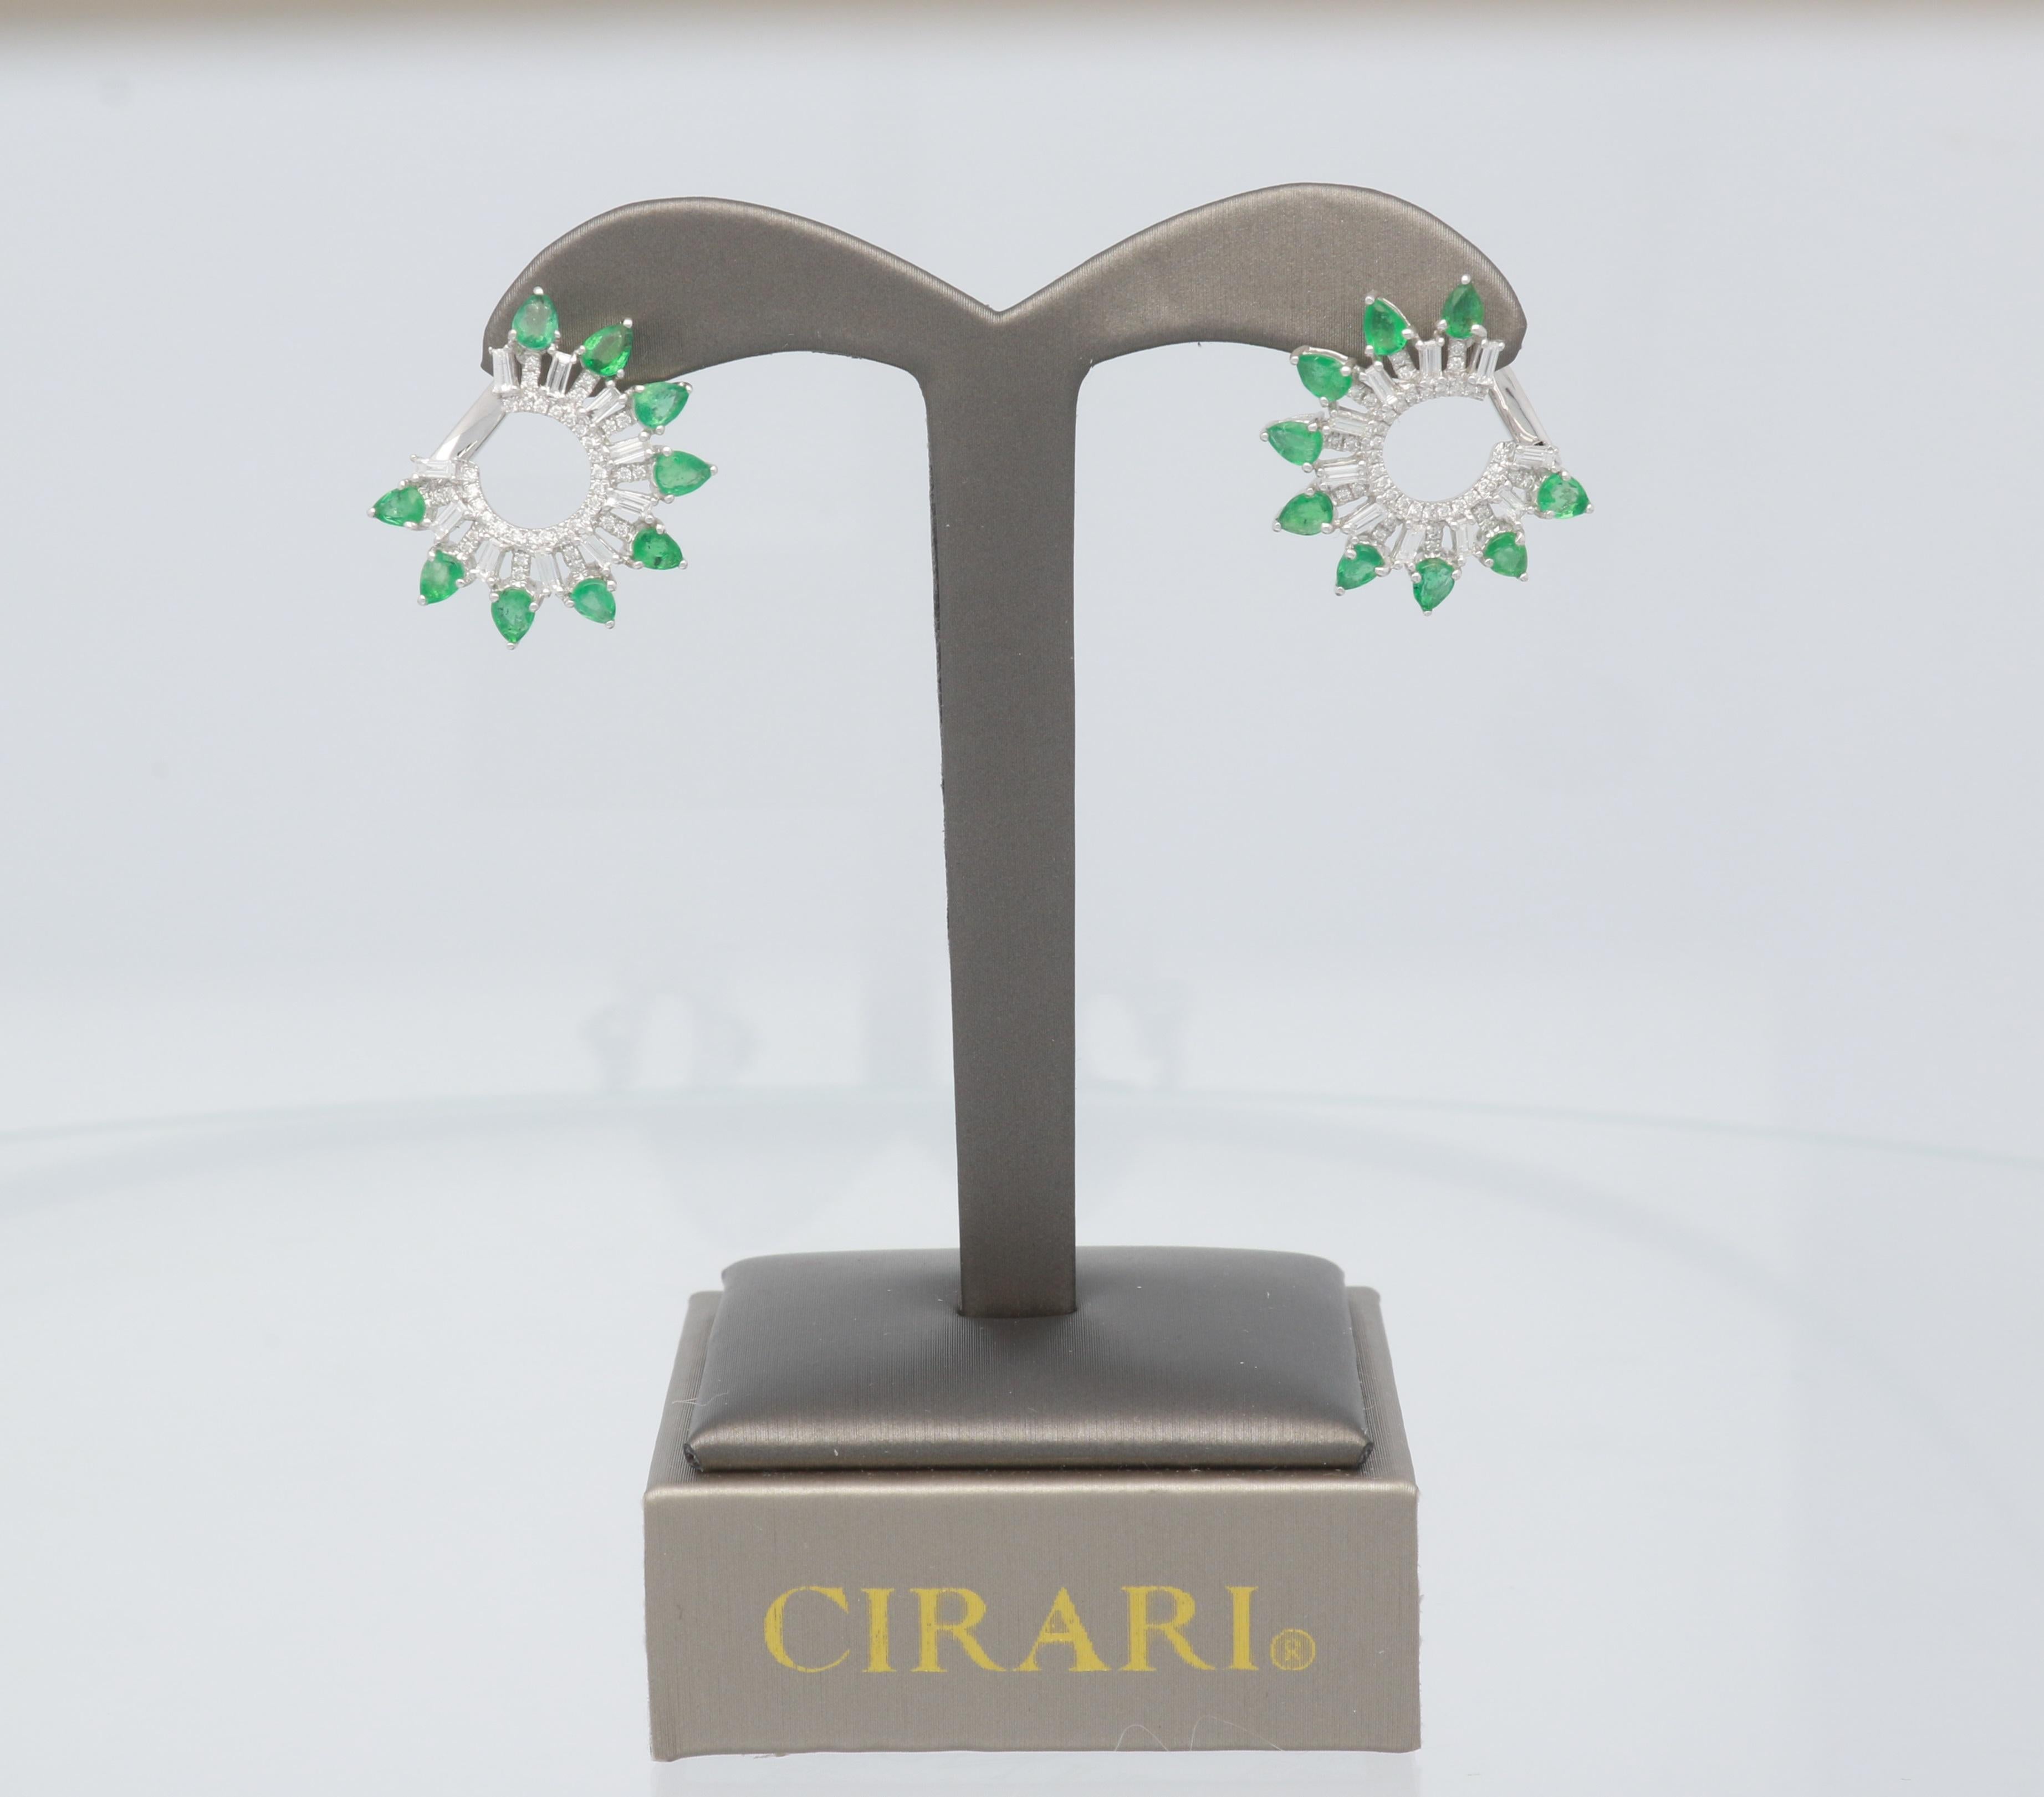 This one of a kind Earring is crafted in 18-karat White Gold and features a 18 Emerald 2.59 Carat, 20 Baguette Diamond 0.58 Carat & 80 Brilliant cut Round Diamonds 0.30 Carat. This Earring is a perfect gift either for yourself or someone you love.